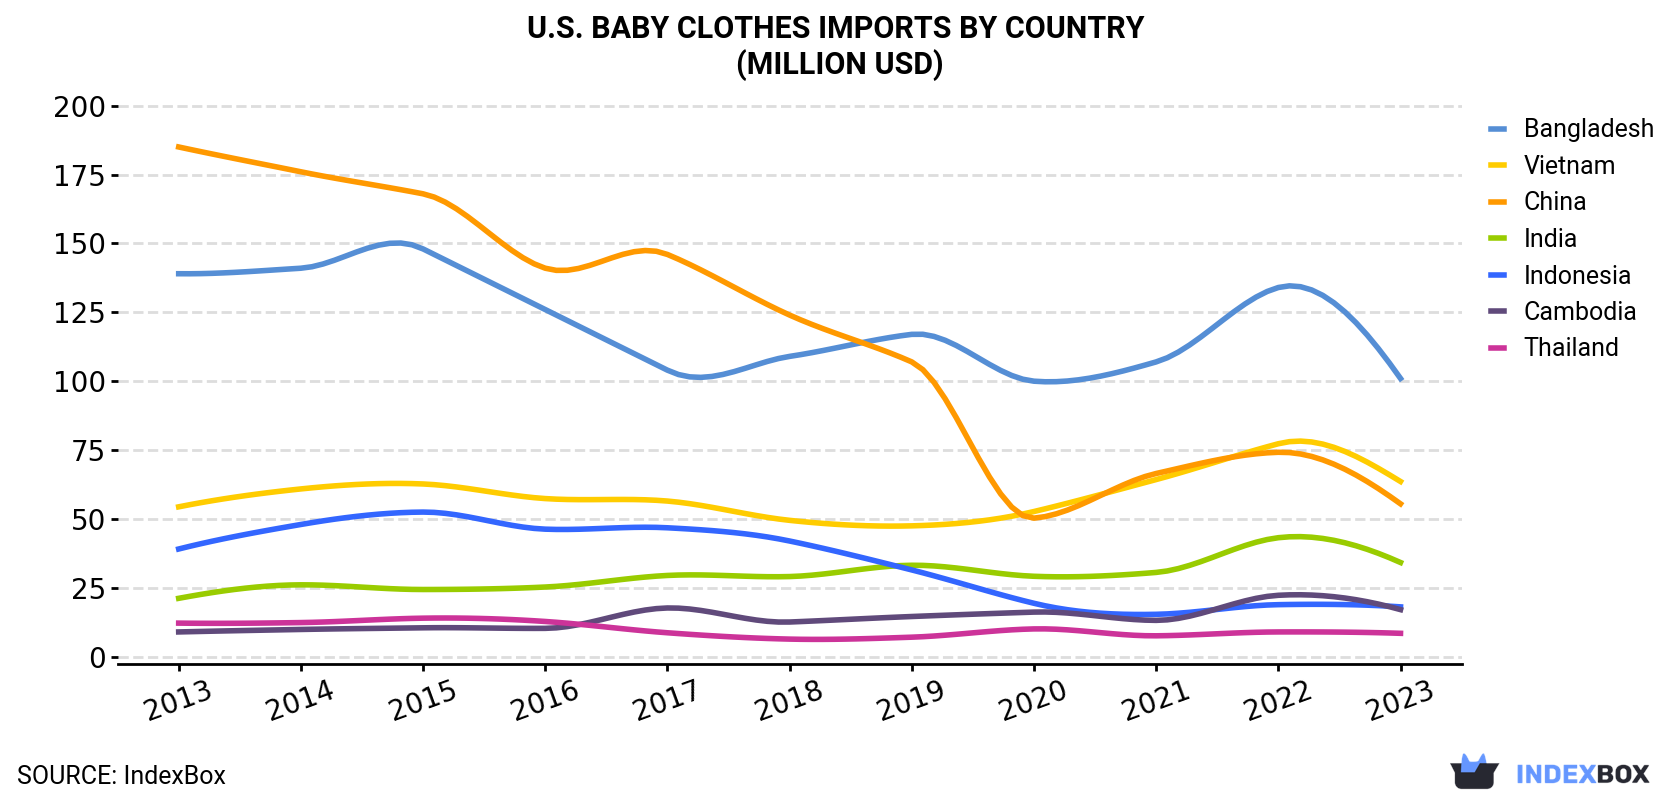 U.S. Baby Clothes Imports By Country (Million USD)